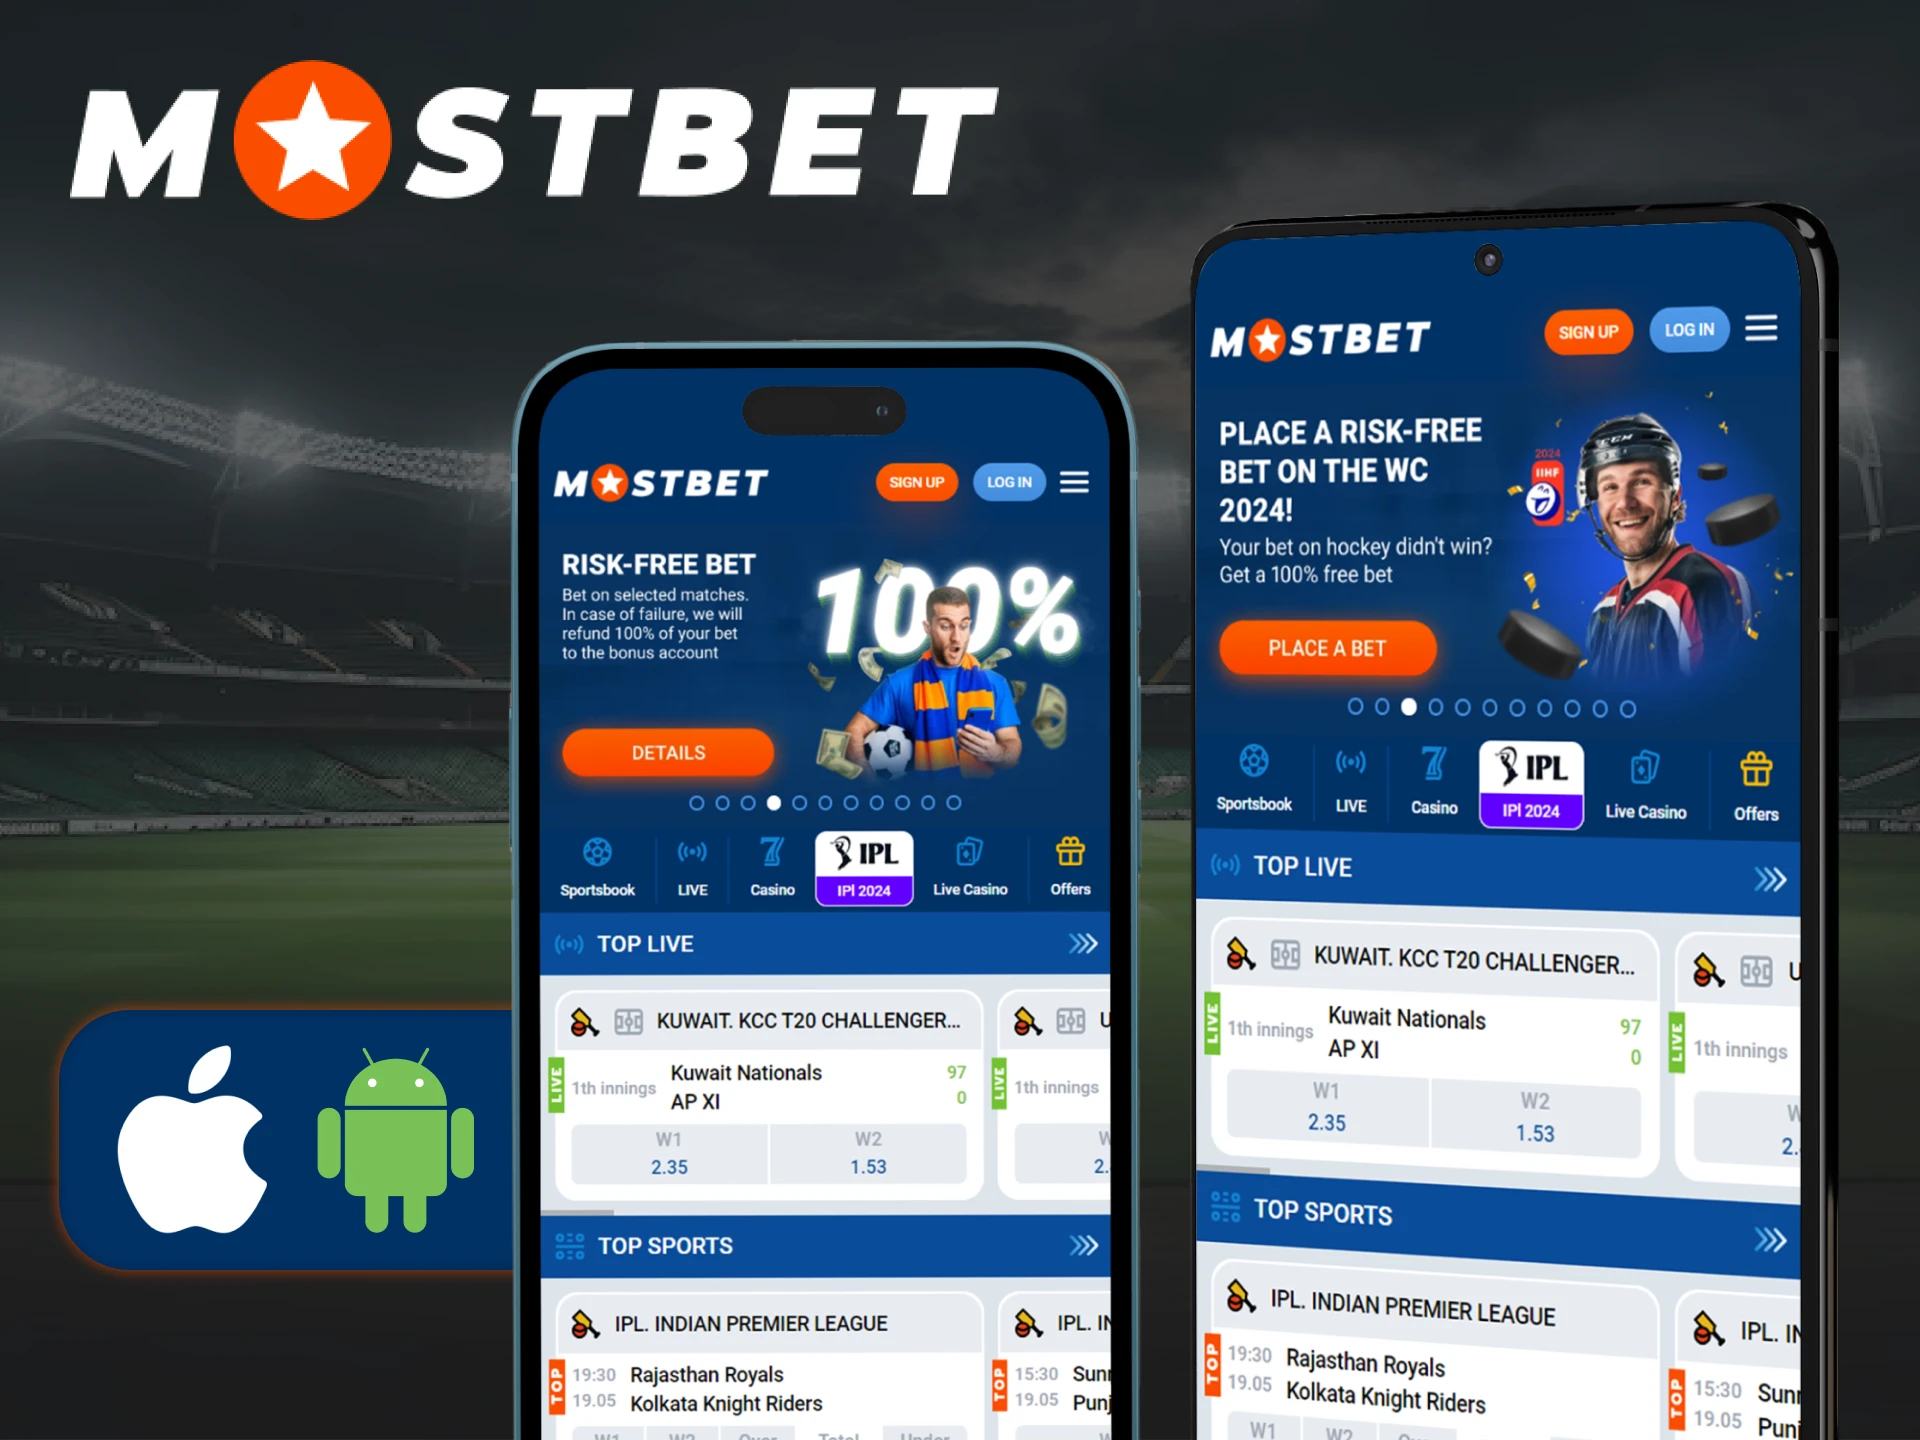 Mostbet has an app for Android and iOS, which is no different from their website.